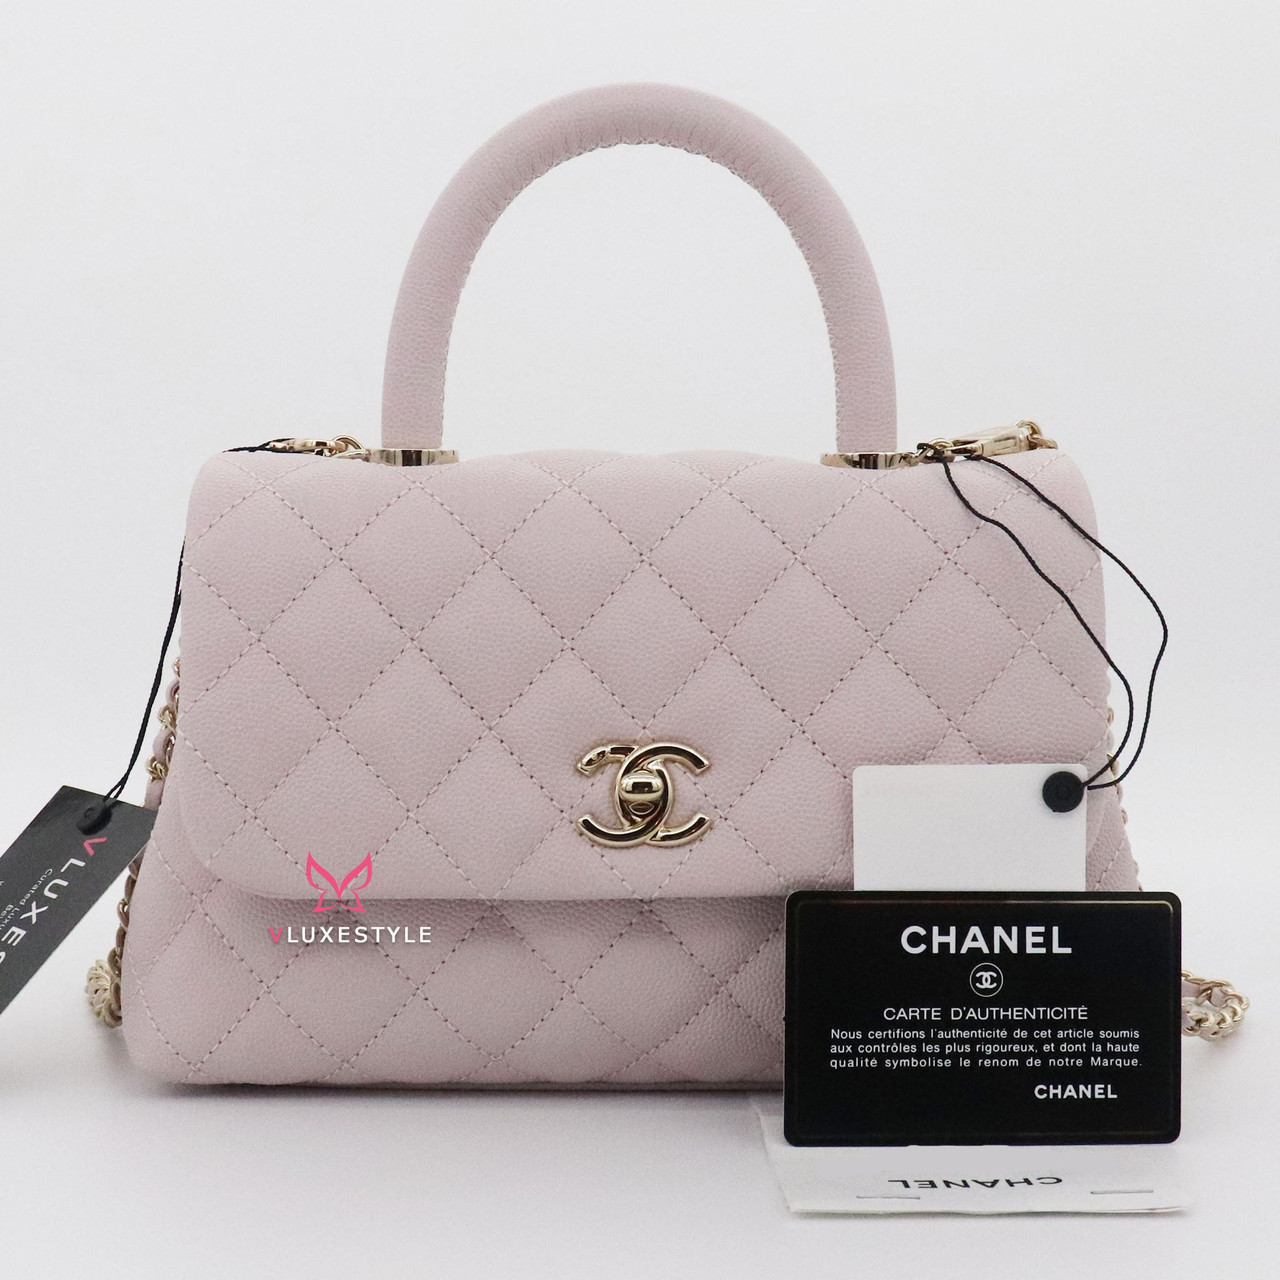 TIMELESS V0GUE PTY LTD on Instagram: “CHANEL COCO HANDLE Price: $5190 USD /  $7250 AUD Year: 2020 (20A) Color: Lilac Size…